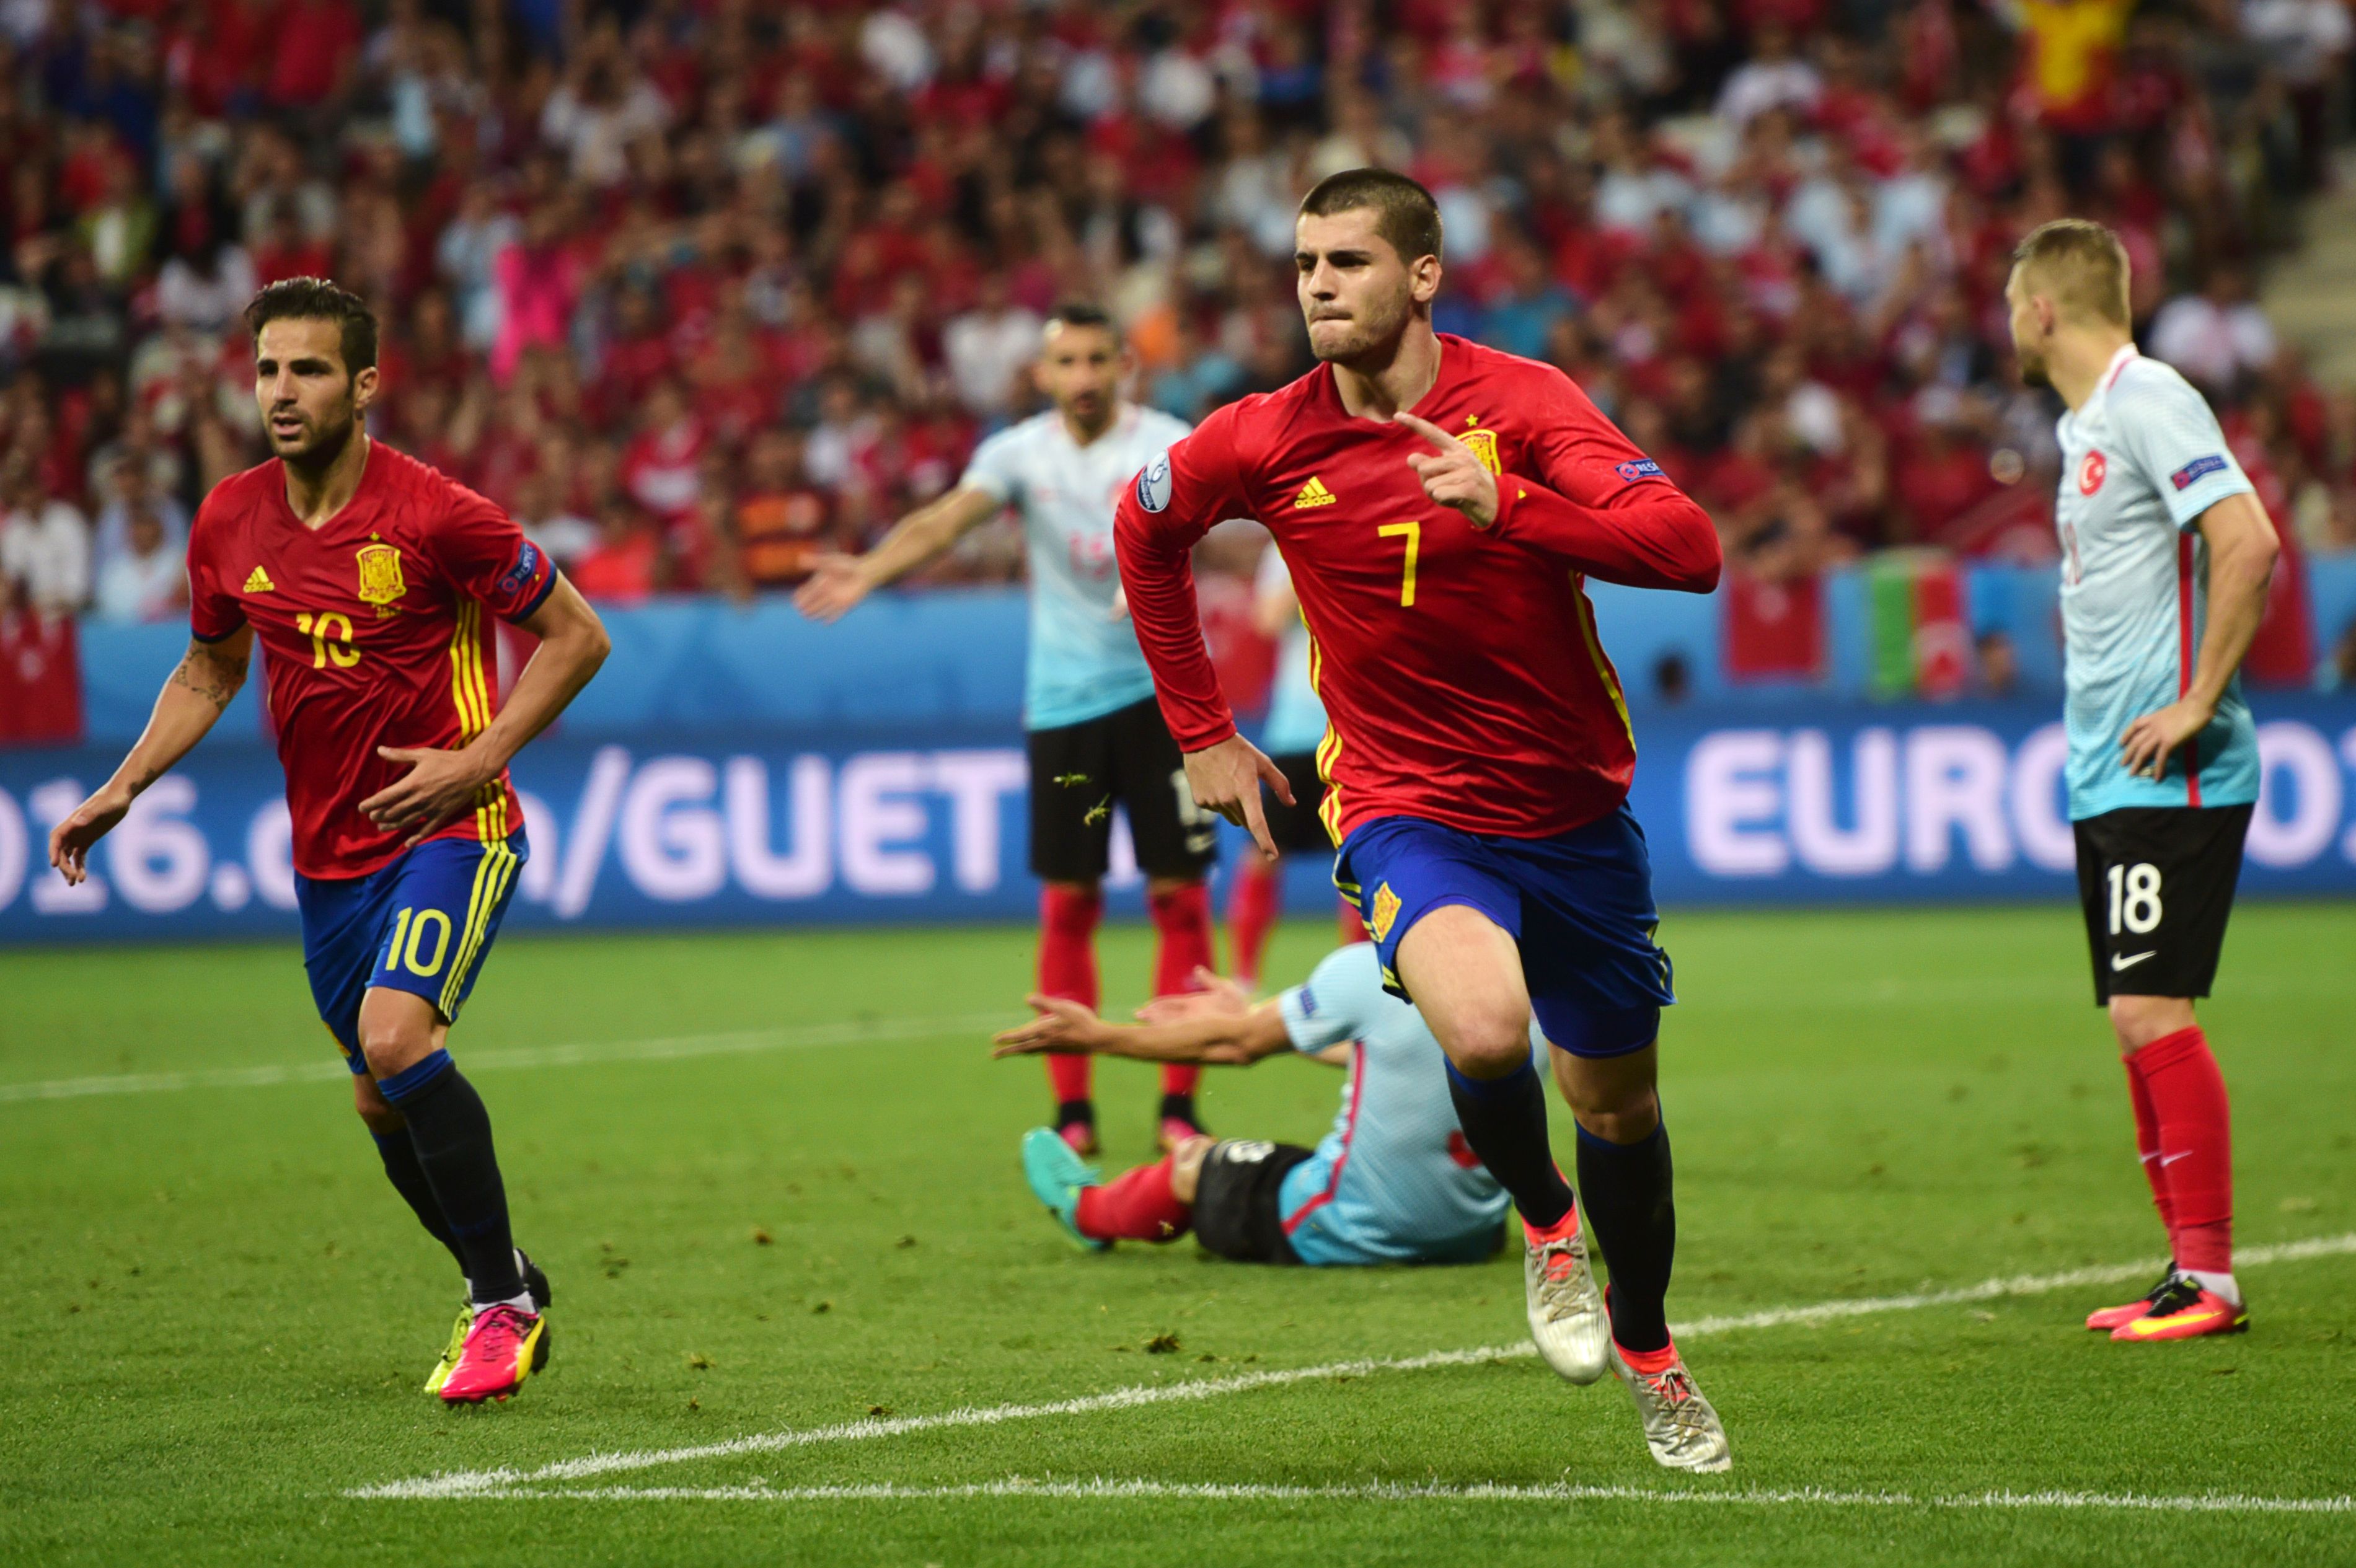 Euro 2016: Morata double leads Spain to easy win over Turkey